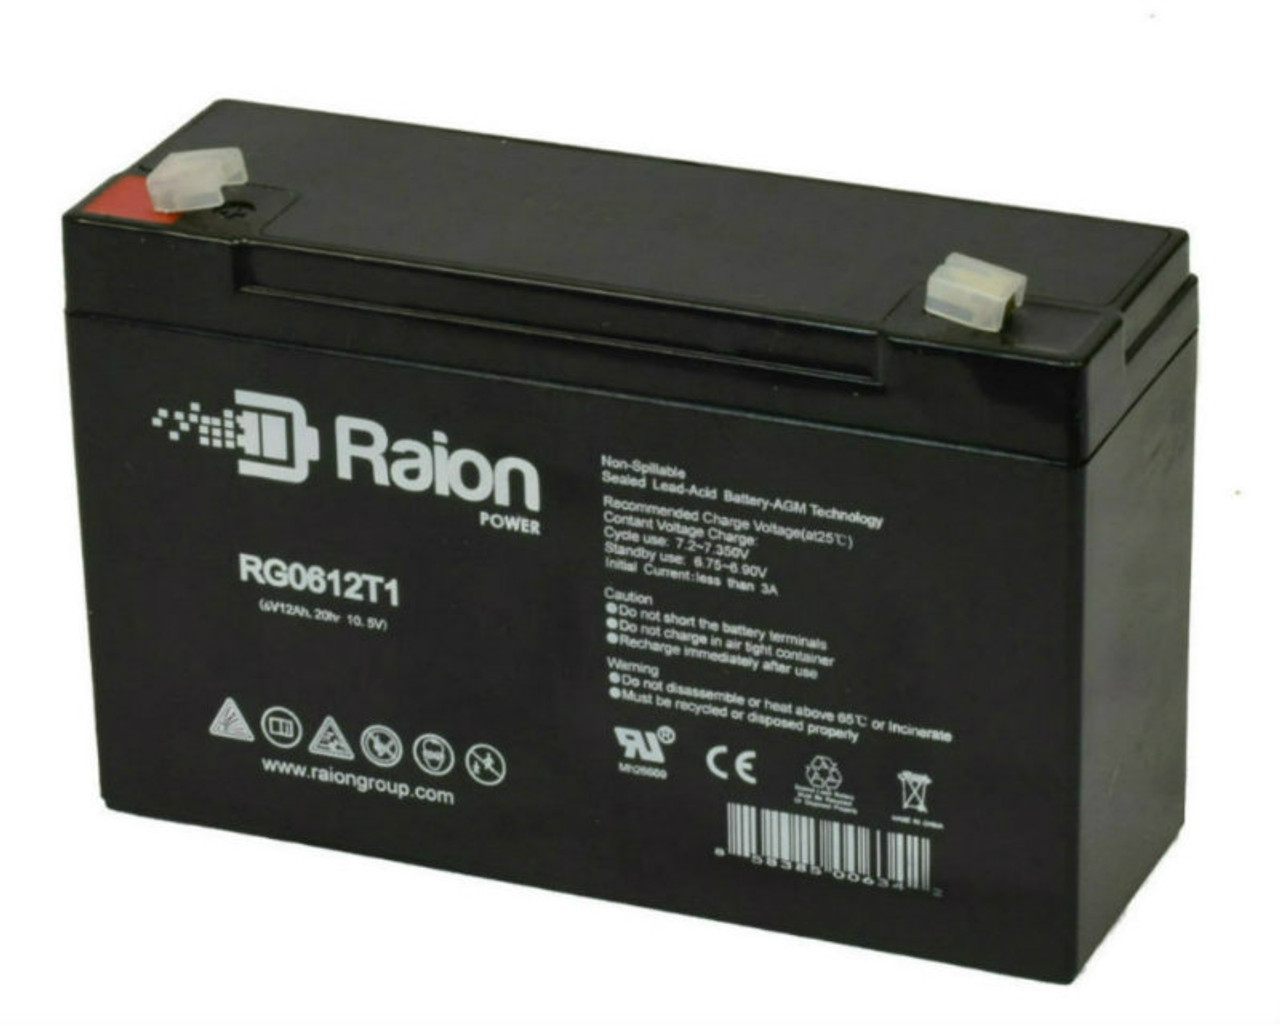 Raion Power RG06120T1 Replacement Emergency Light Battery for Sure-Lites UNH